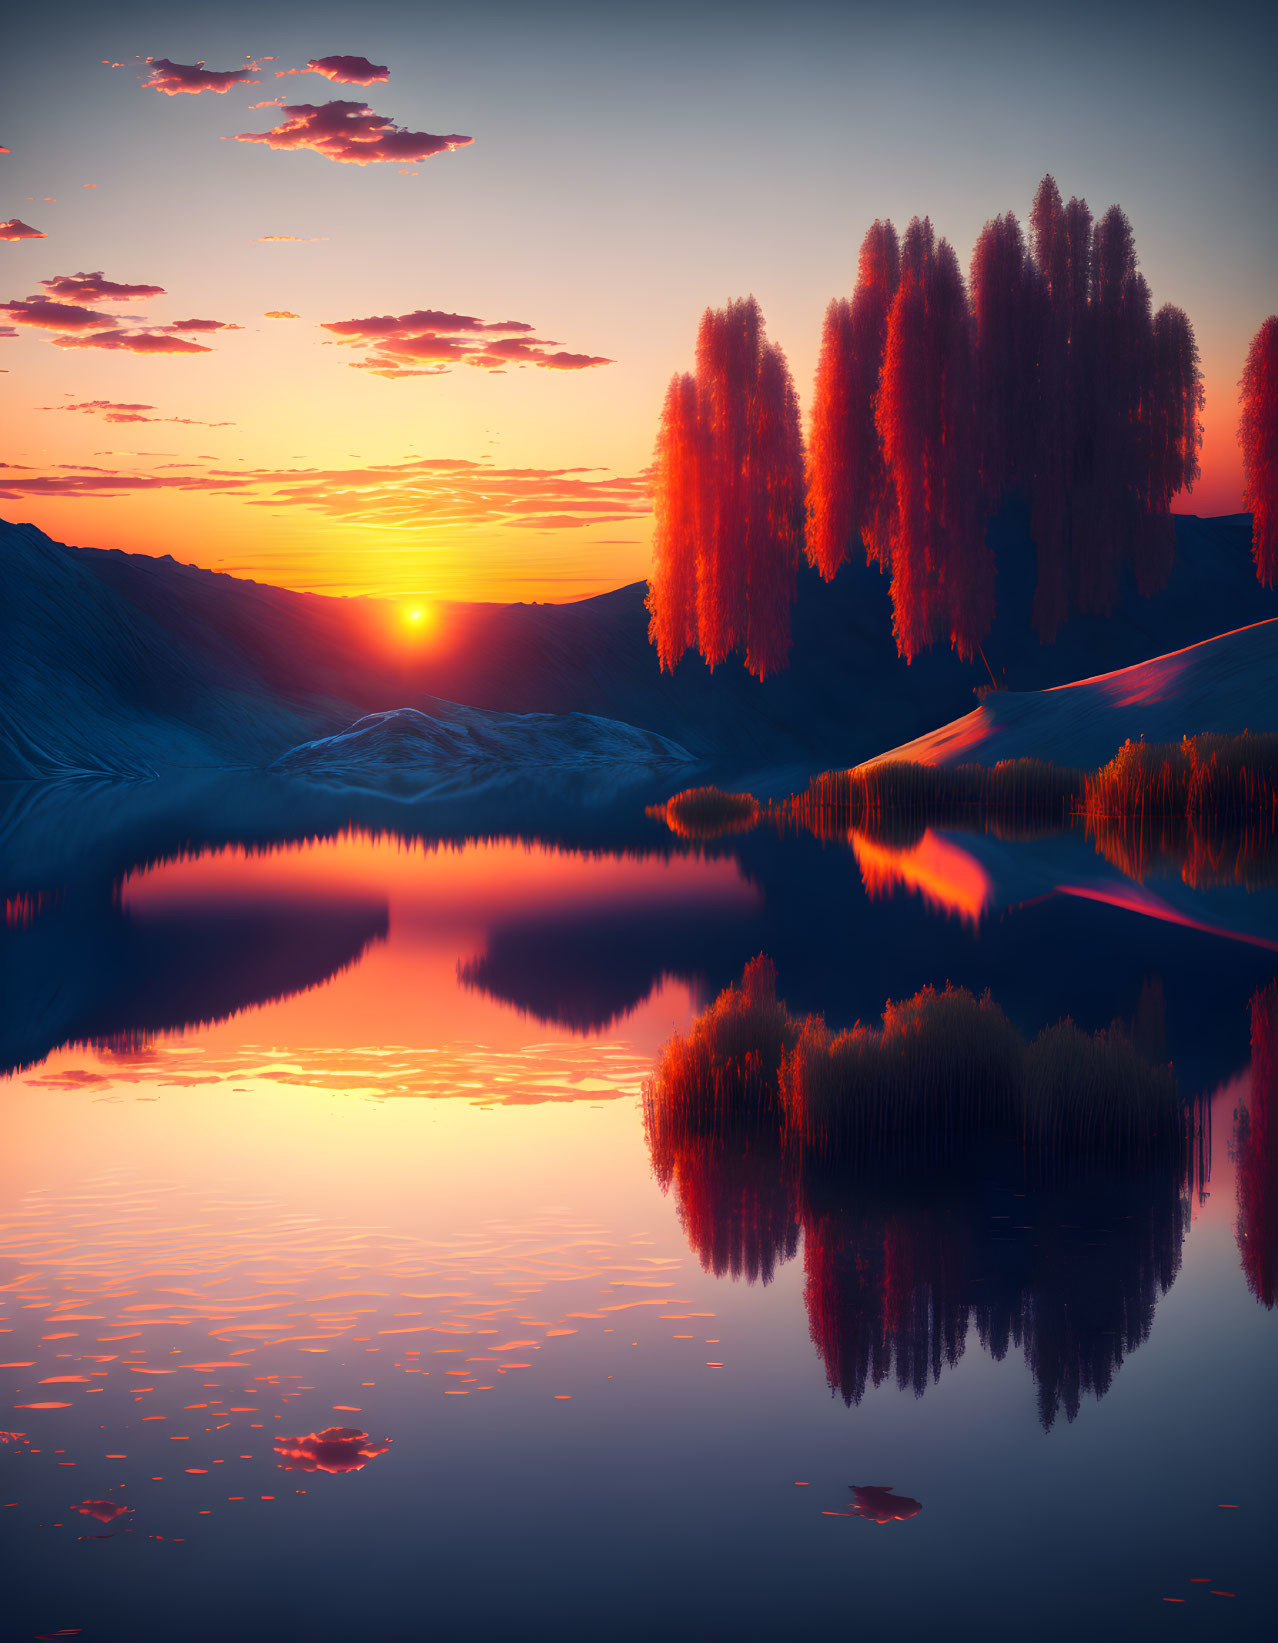 Tranquil sunset scene with orange hues reflecting in calm lake